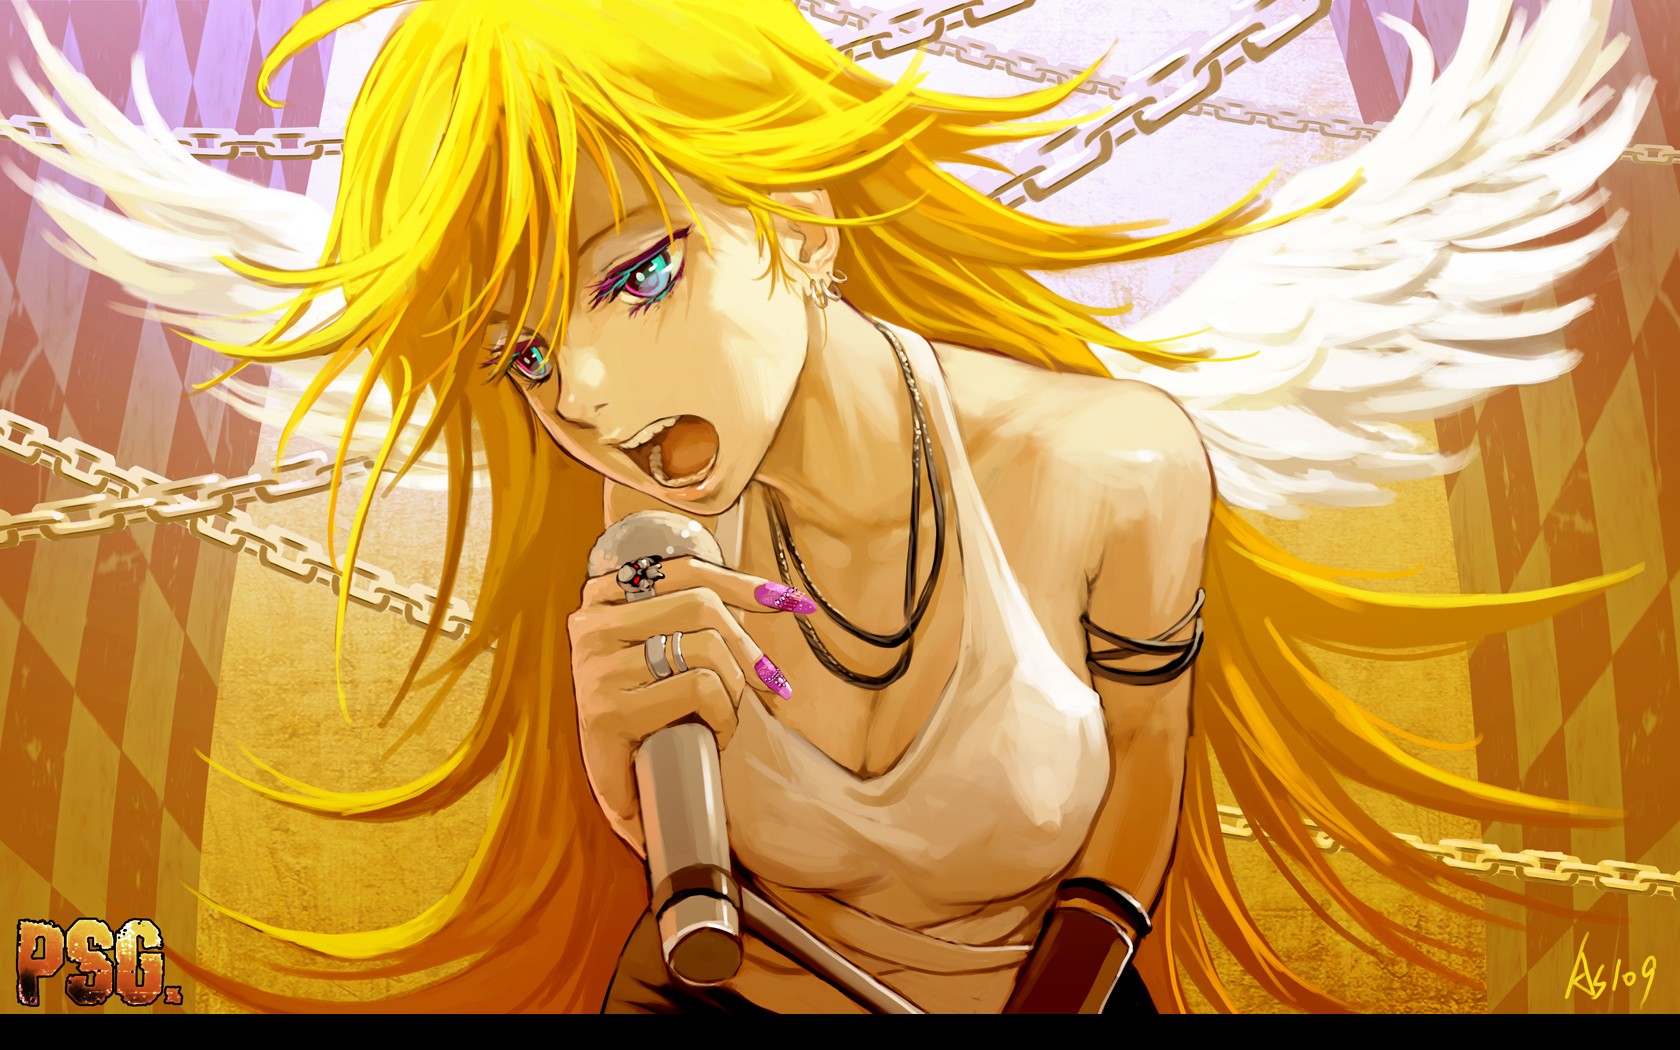 Anime 1680x1050 angel anime anime girls Anarchy Panty singing blonde open mouth chains painted nails women microphone singer angel girl